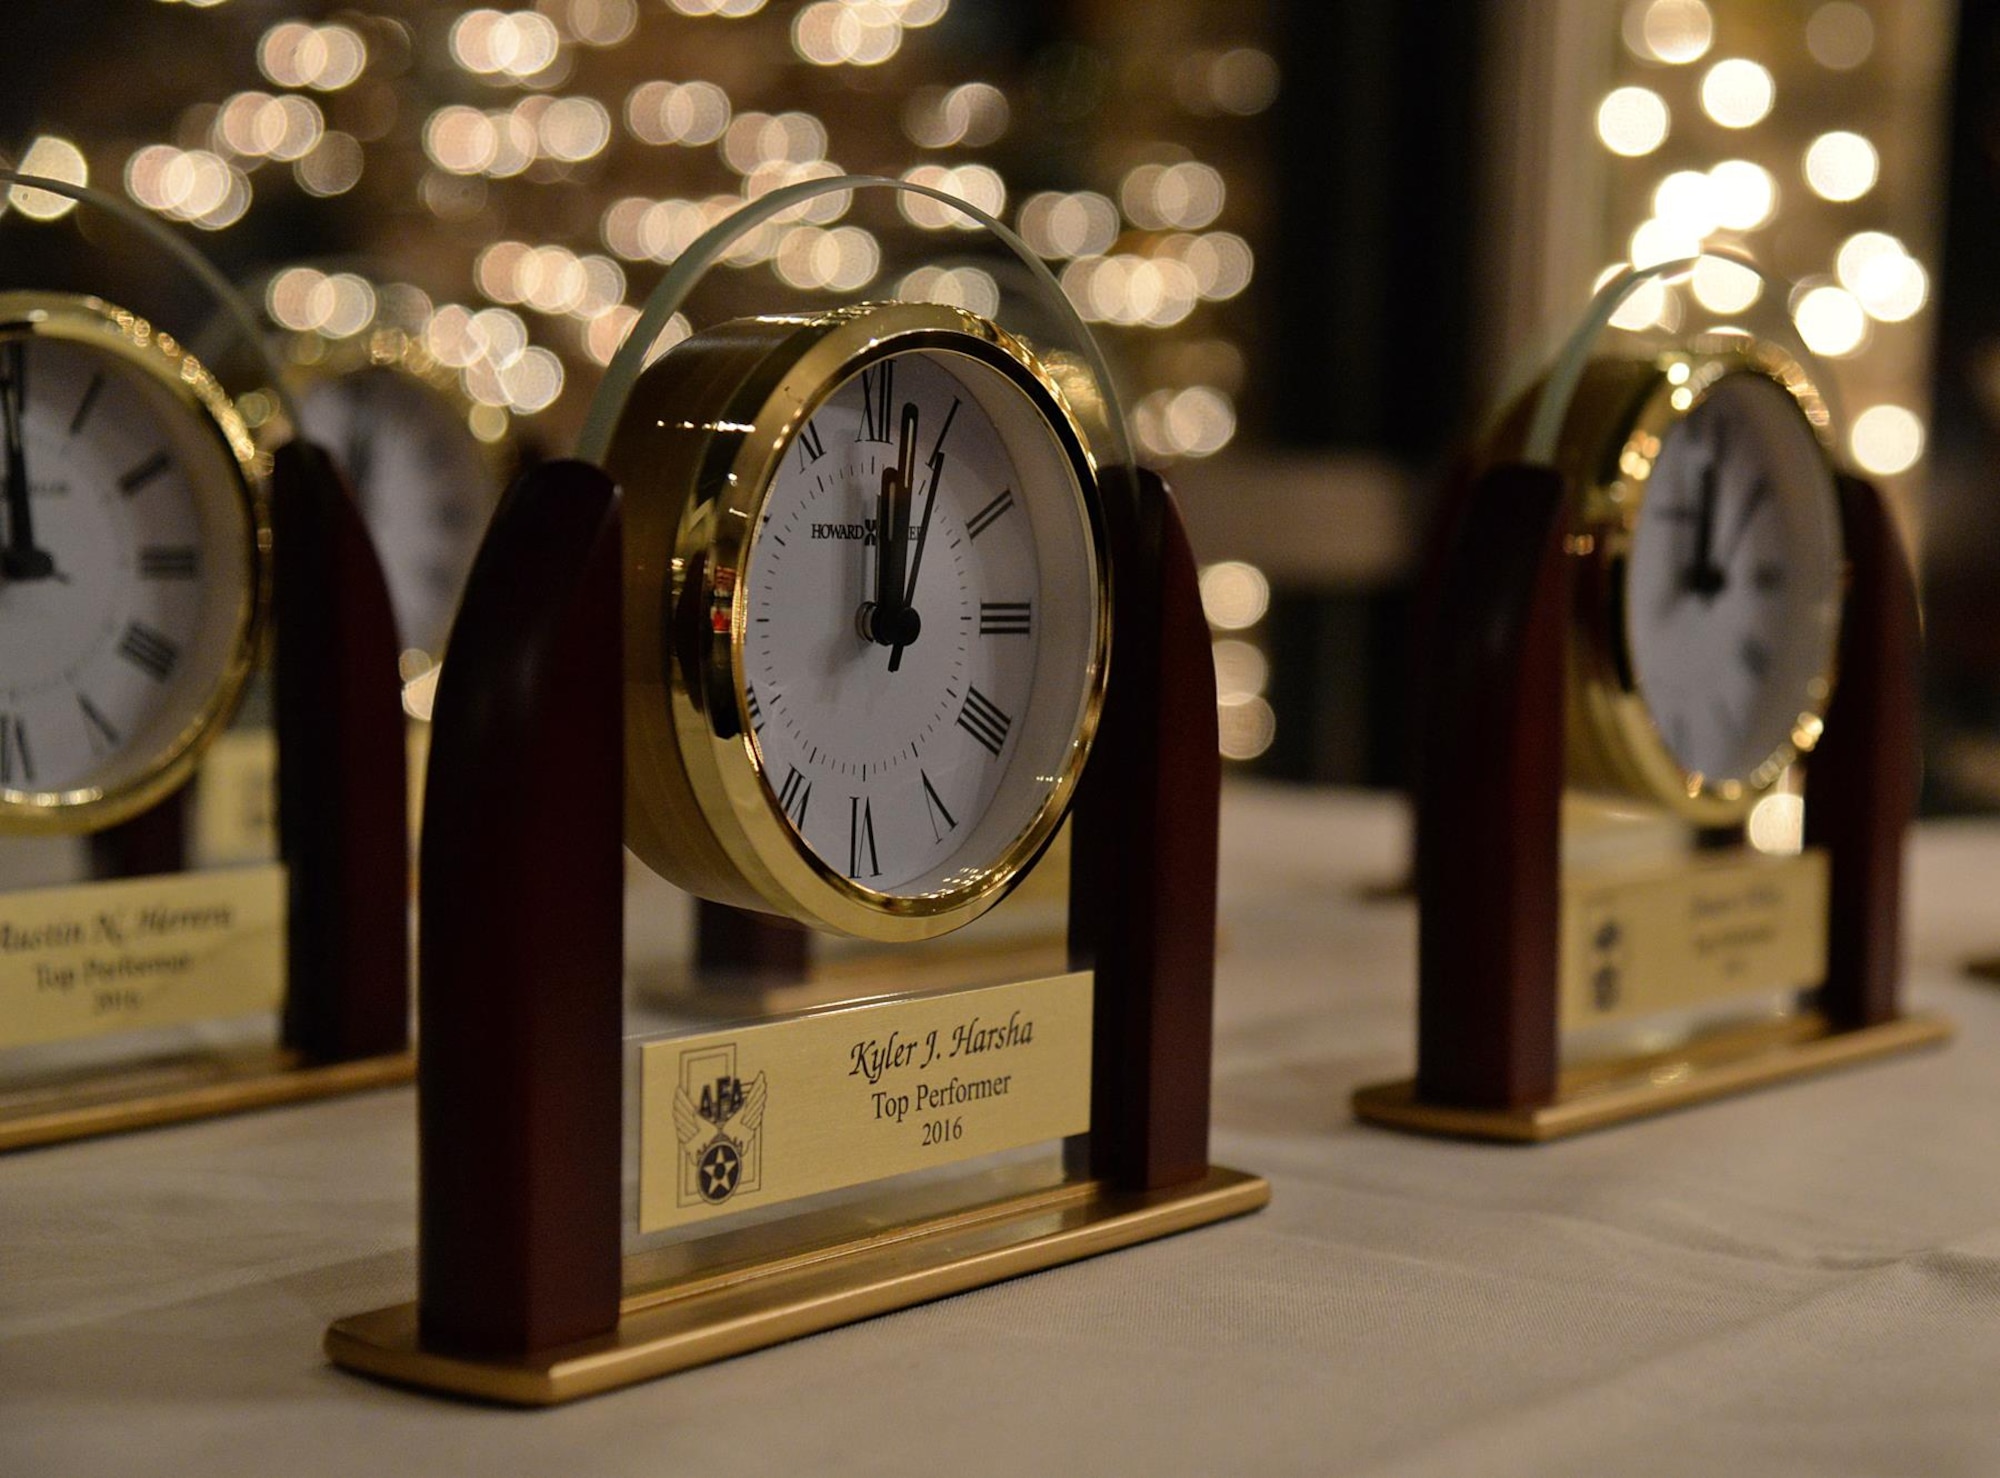 The Air Force Association Kevin J. Sullivan Awards recognizes Hill Air Force Base's top performers in logistics and maintenance. Winners received an engraved desktop clock. (U.S. Air Force photo by Alex R. Lloyd)
